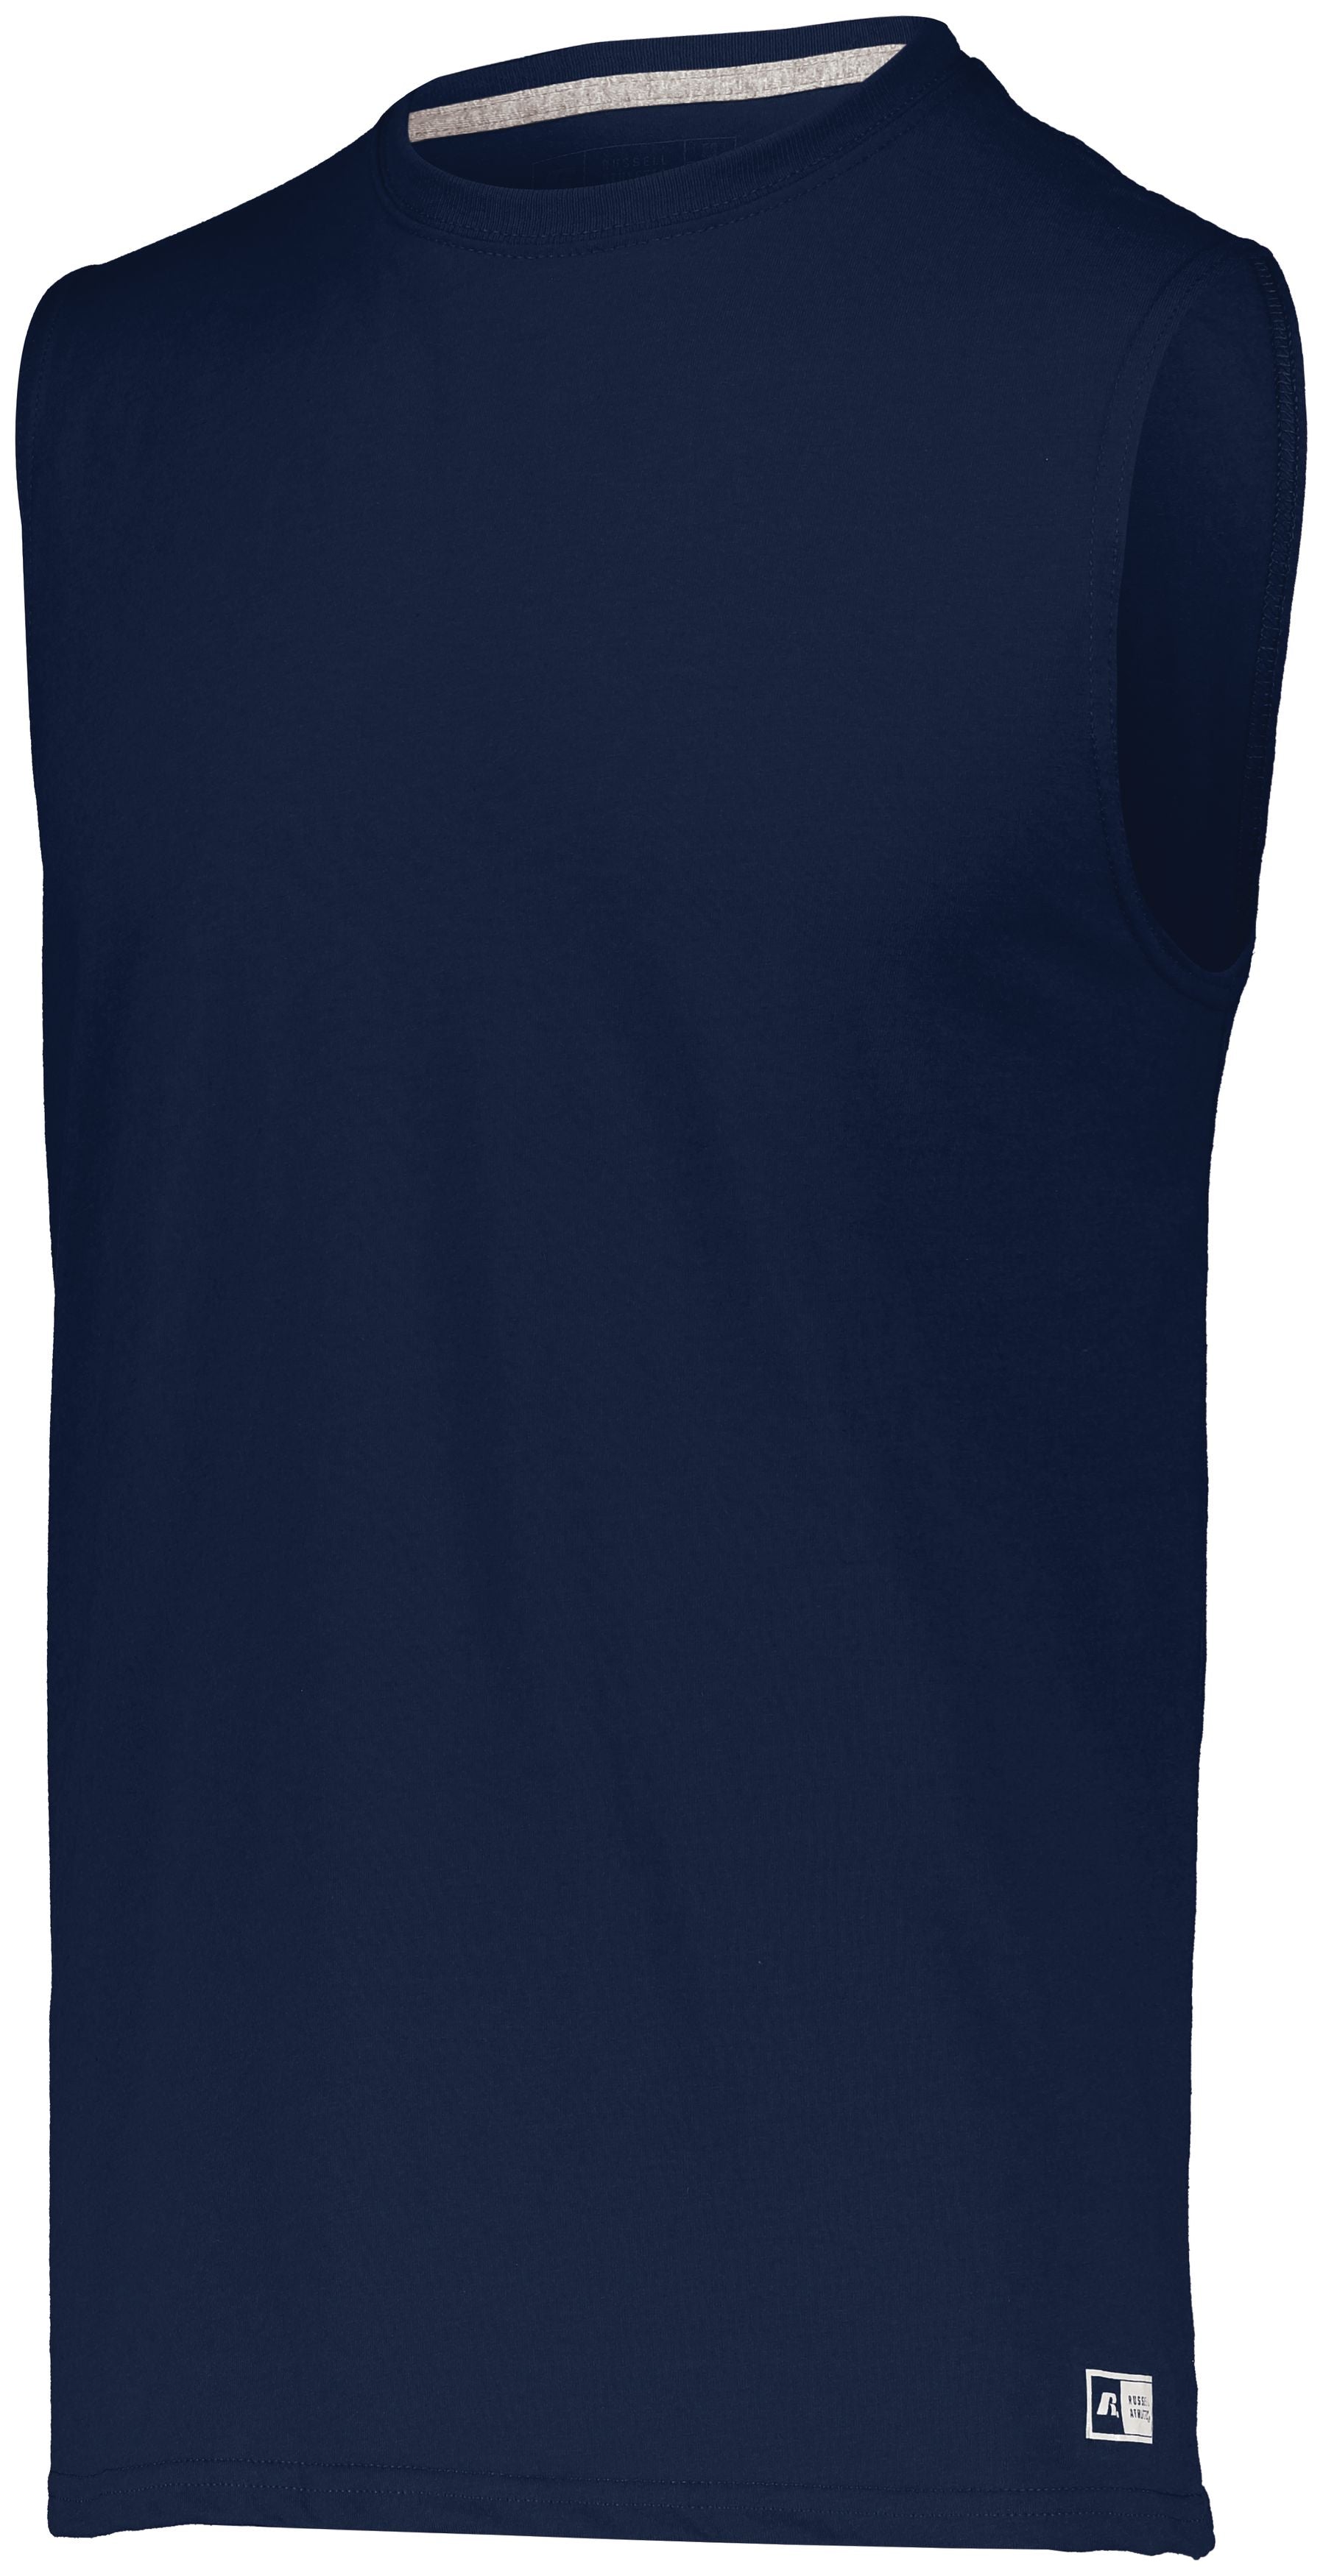 Russell Athletic Essential Muscle Tee in Navy  -Part of the Adult, Adult-Tee-Shirt, T-Shirts, Russell-Athletic-Products, Shirts product lines at KanaleyCreations.com